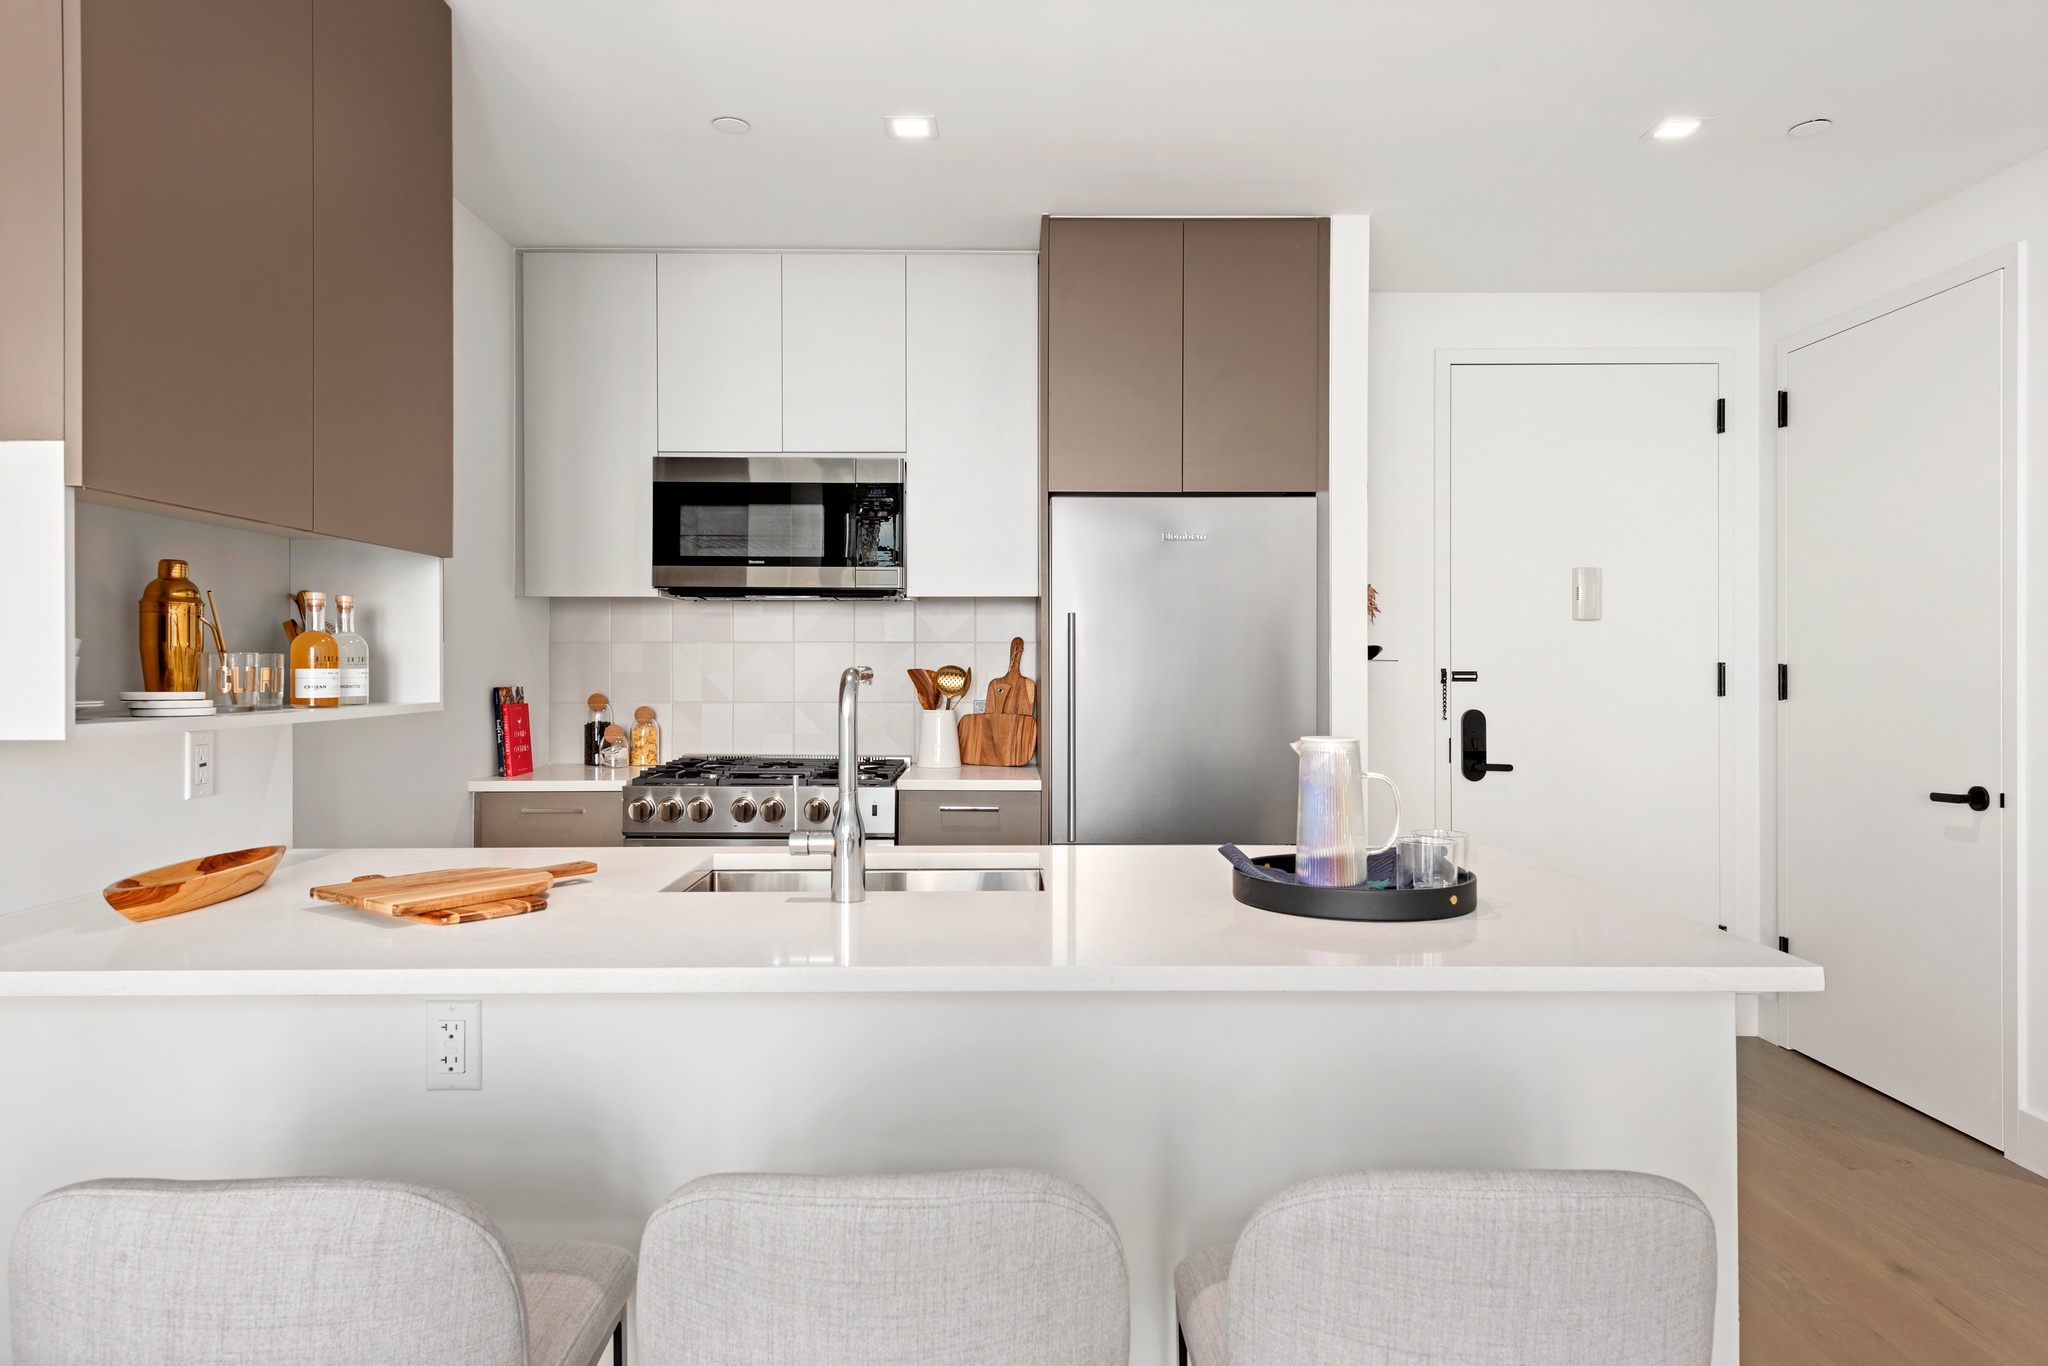 Modern kitchen near entrance with light grey and tan cabinetry, white counters with seating, stainless steel applicances and wood floors